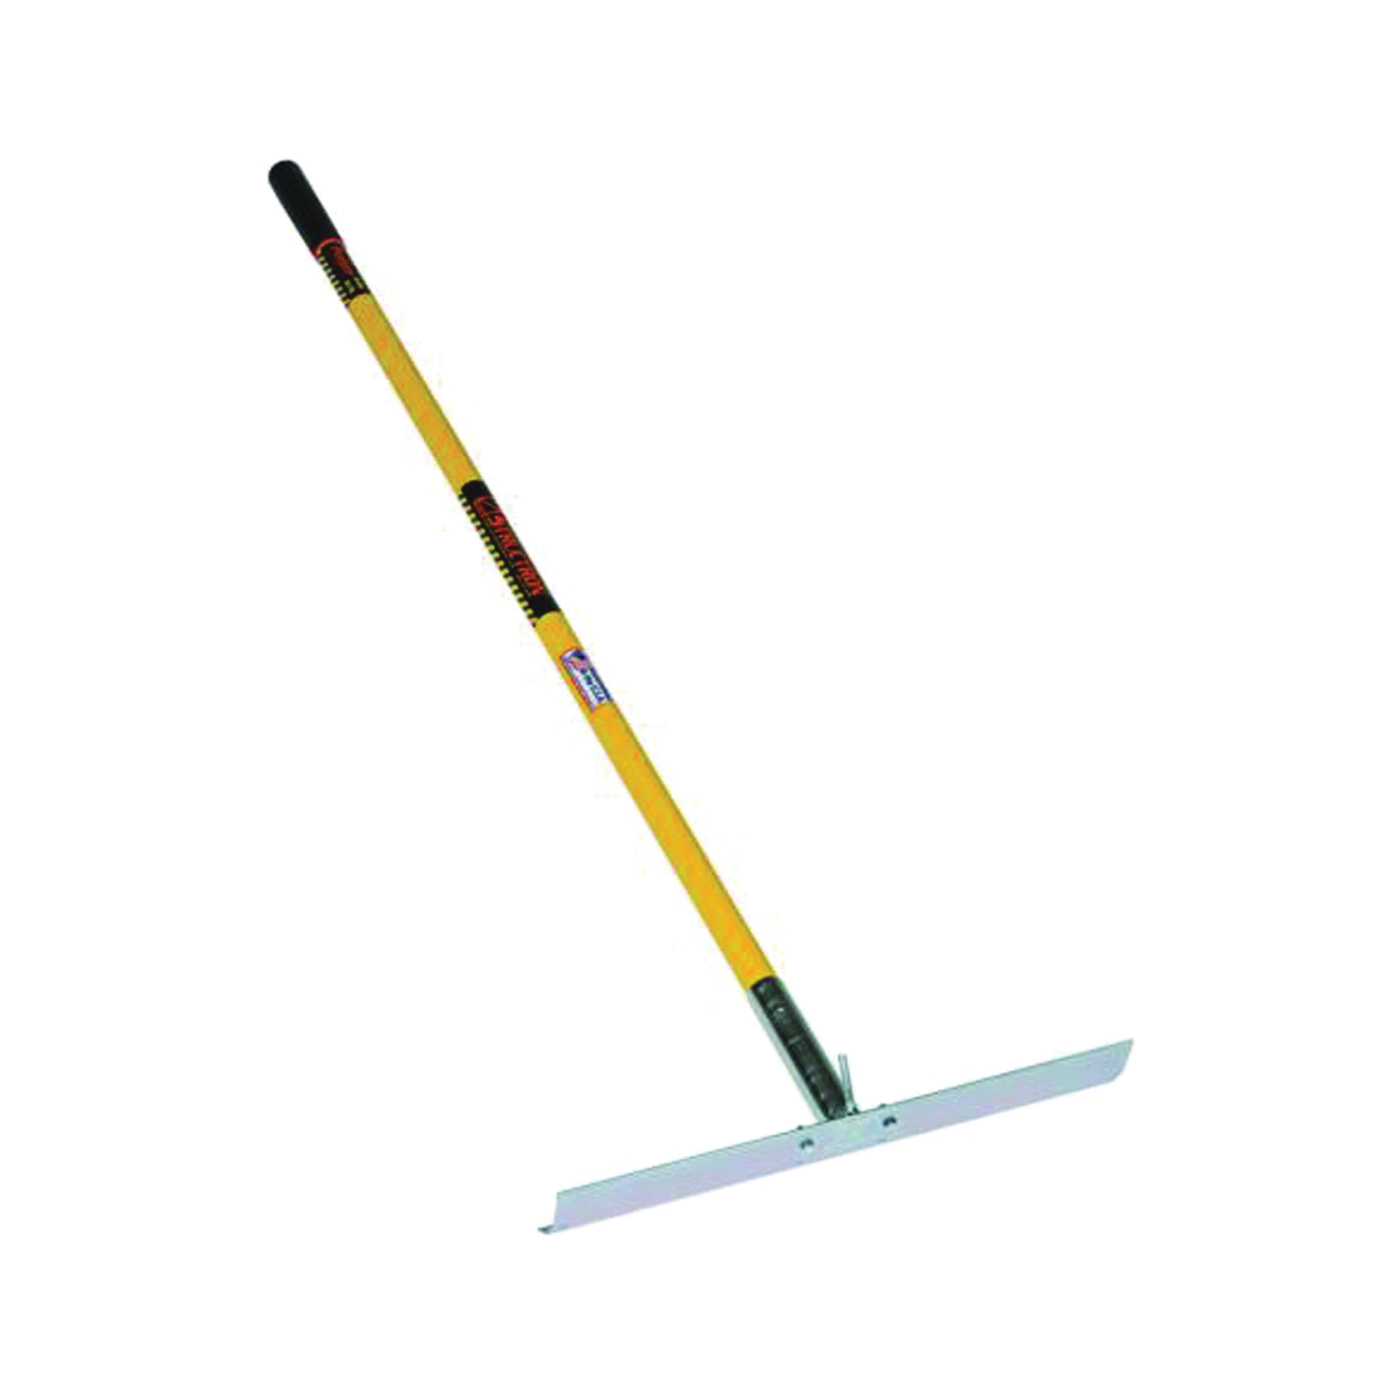 S600 Power Series 73310 Concrete Placer Tool with Hook, 61 in OAL, 3-1/4 in L Tine, Fiberglass Handle